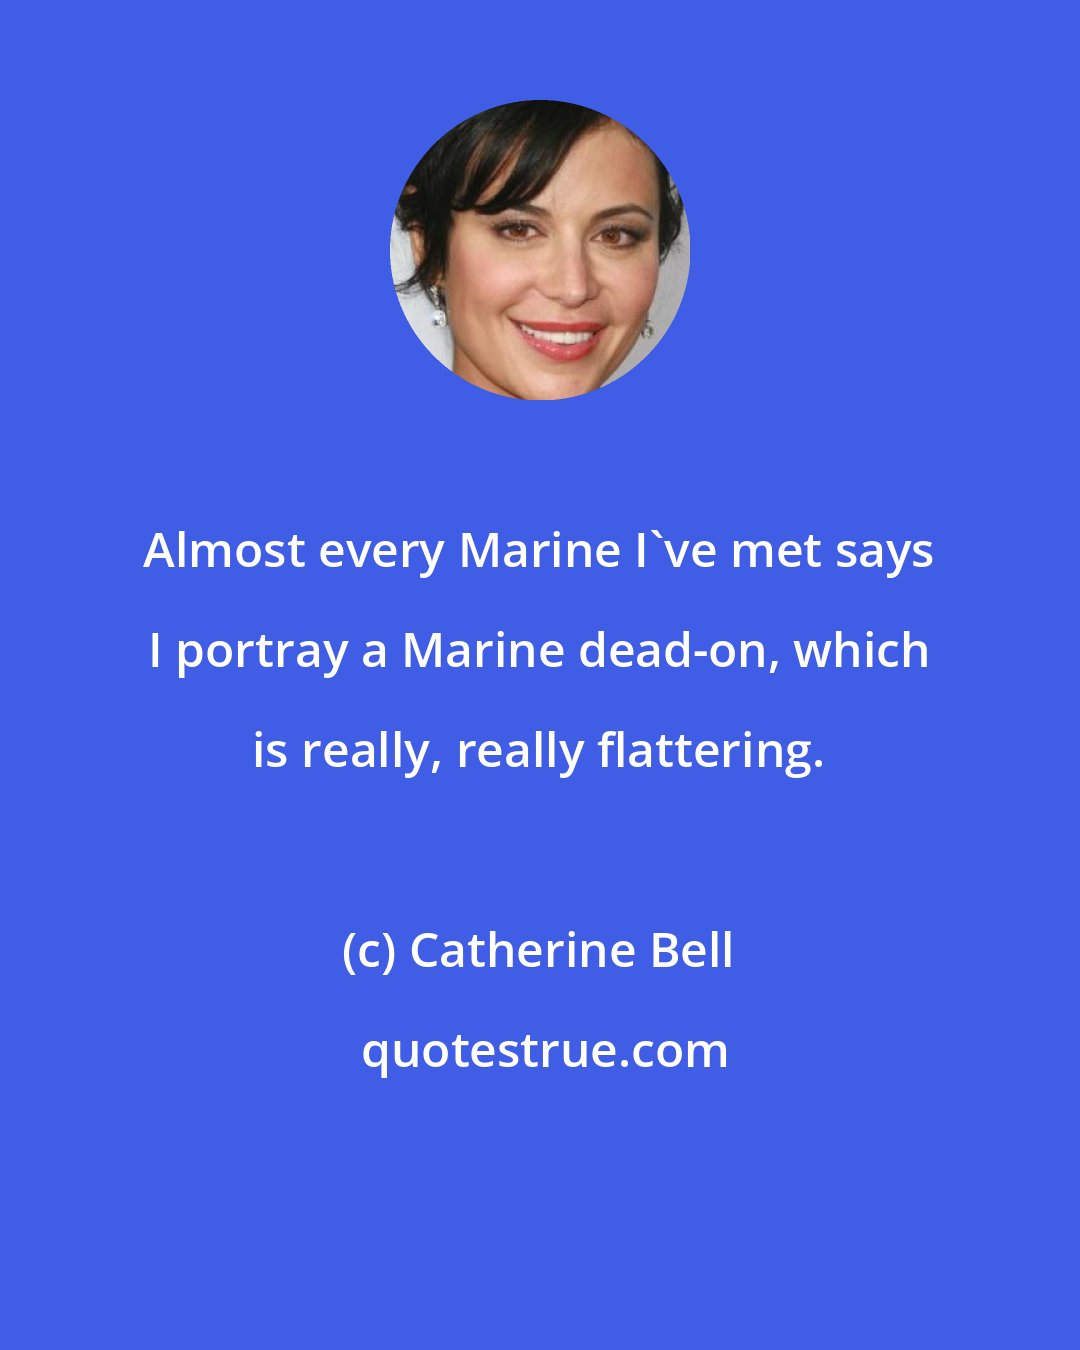 Catherine Bell: Almost every Marine I've met says I portray a Marine dead-on, which is really, really flattering.